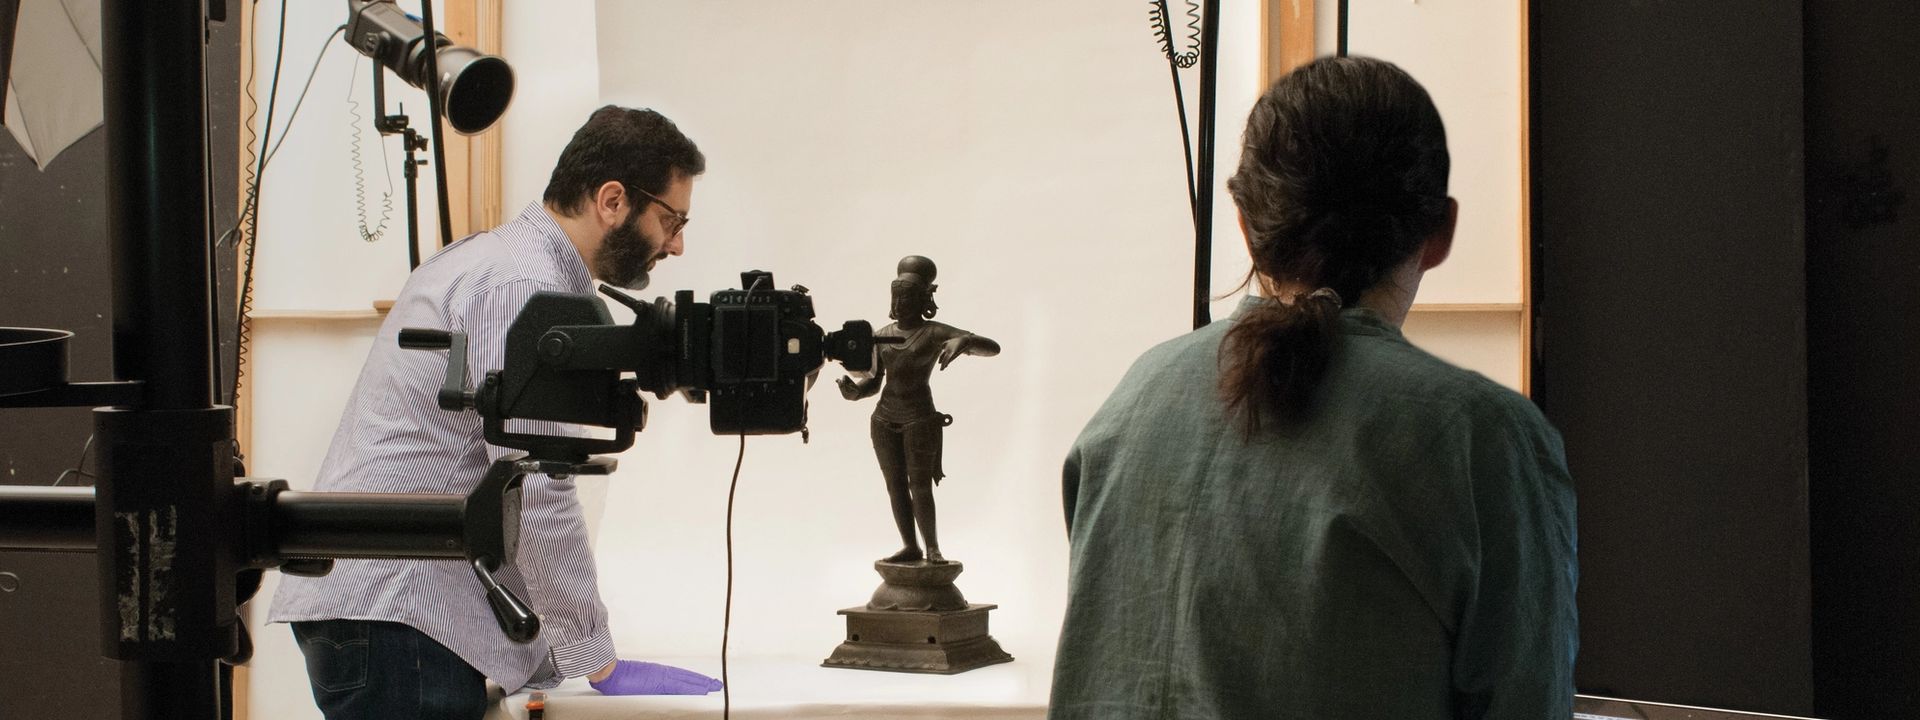 Two photographers in the photo studio taking images of a sculpture